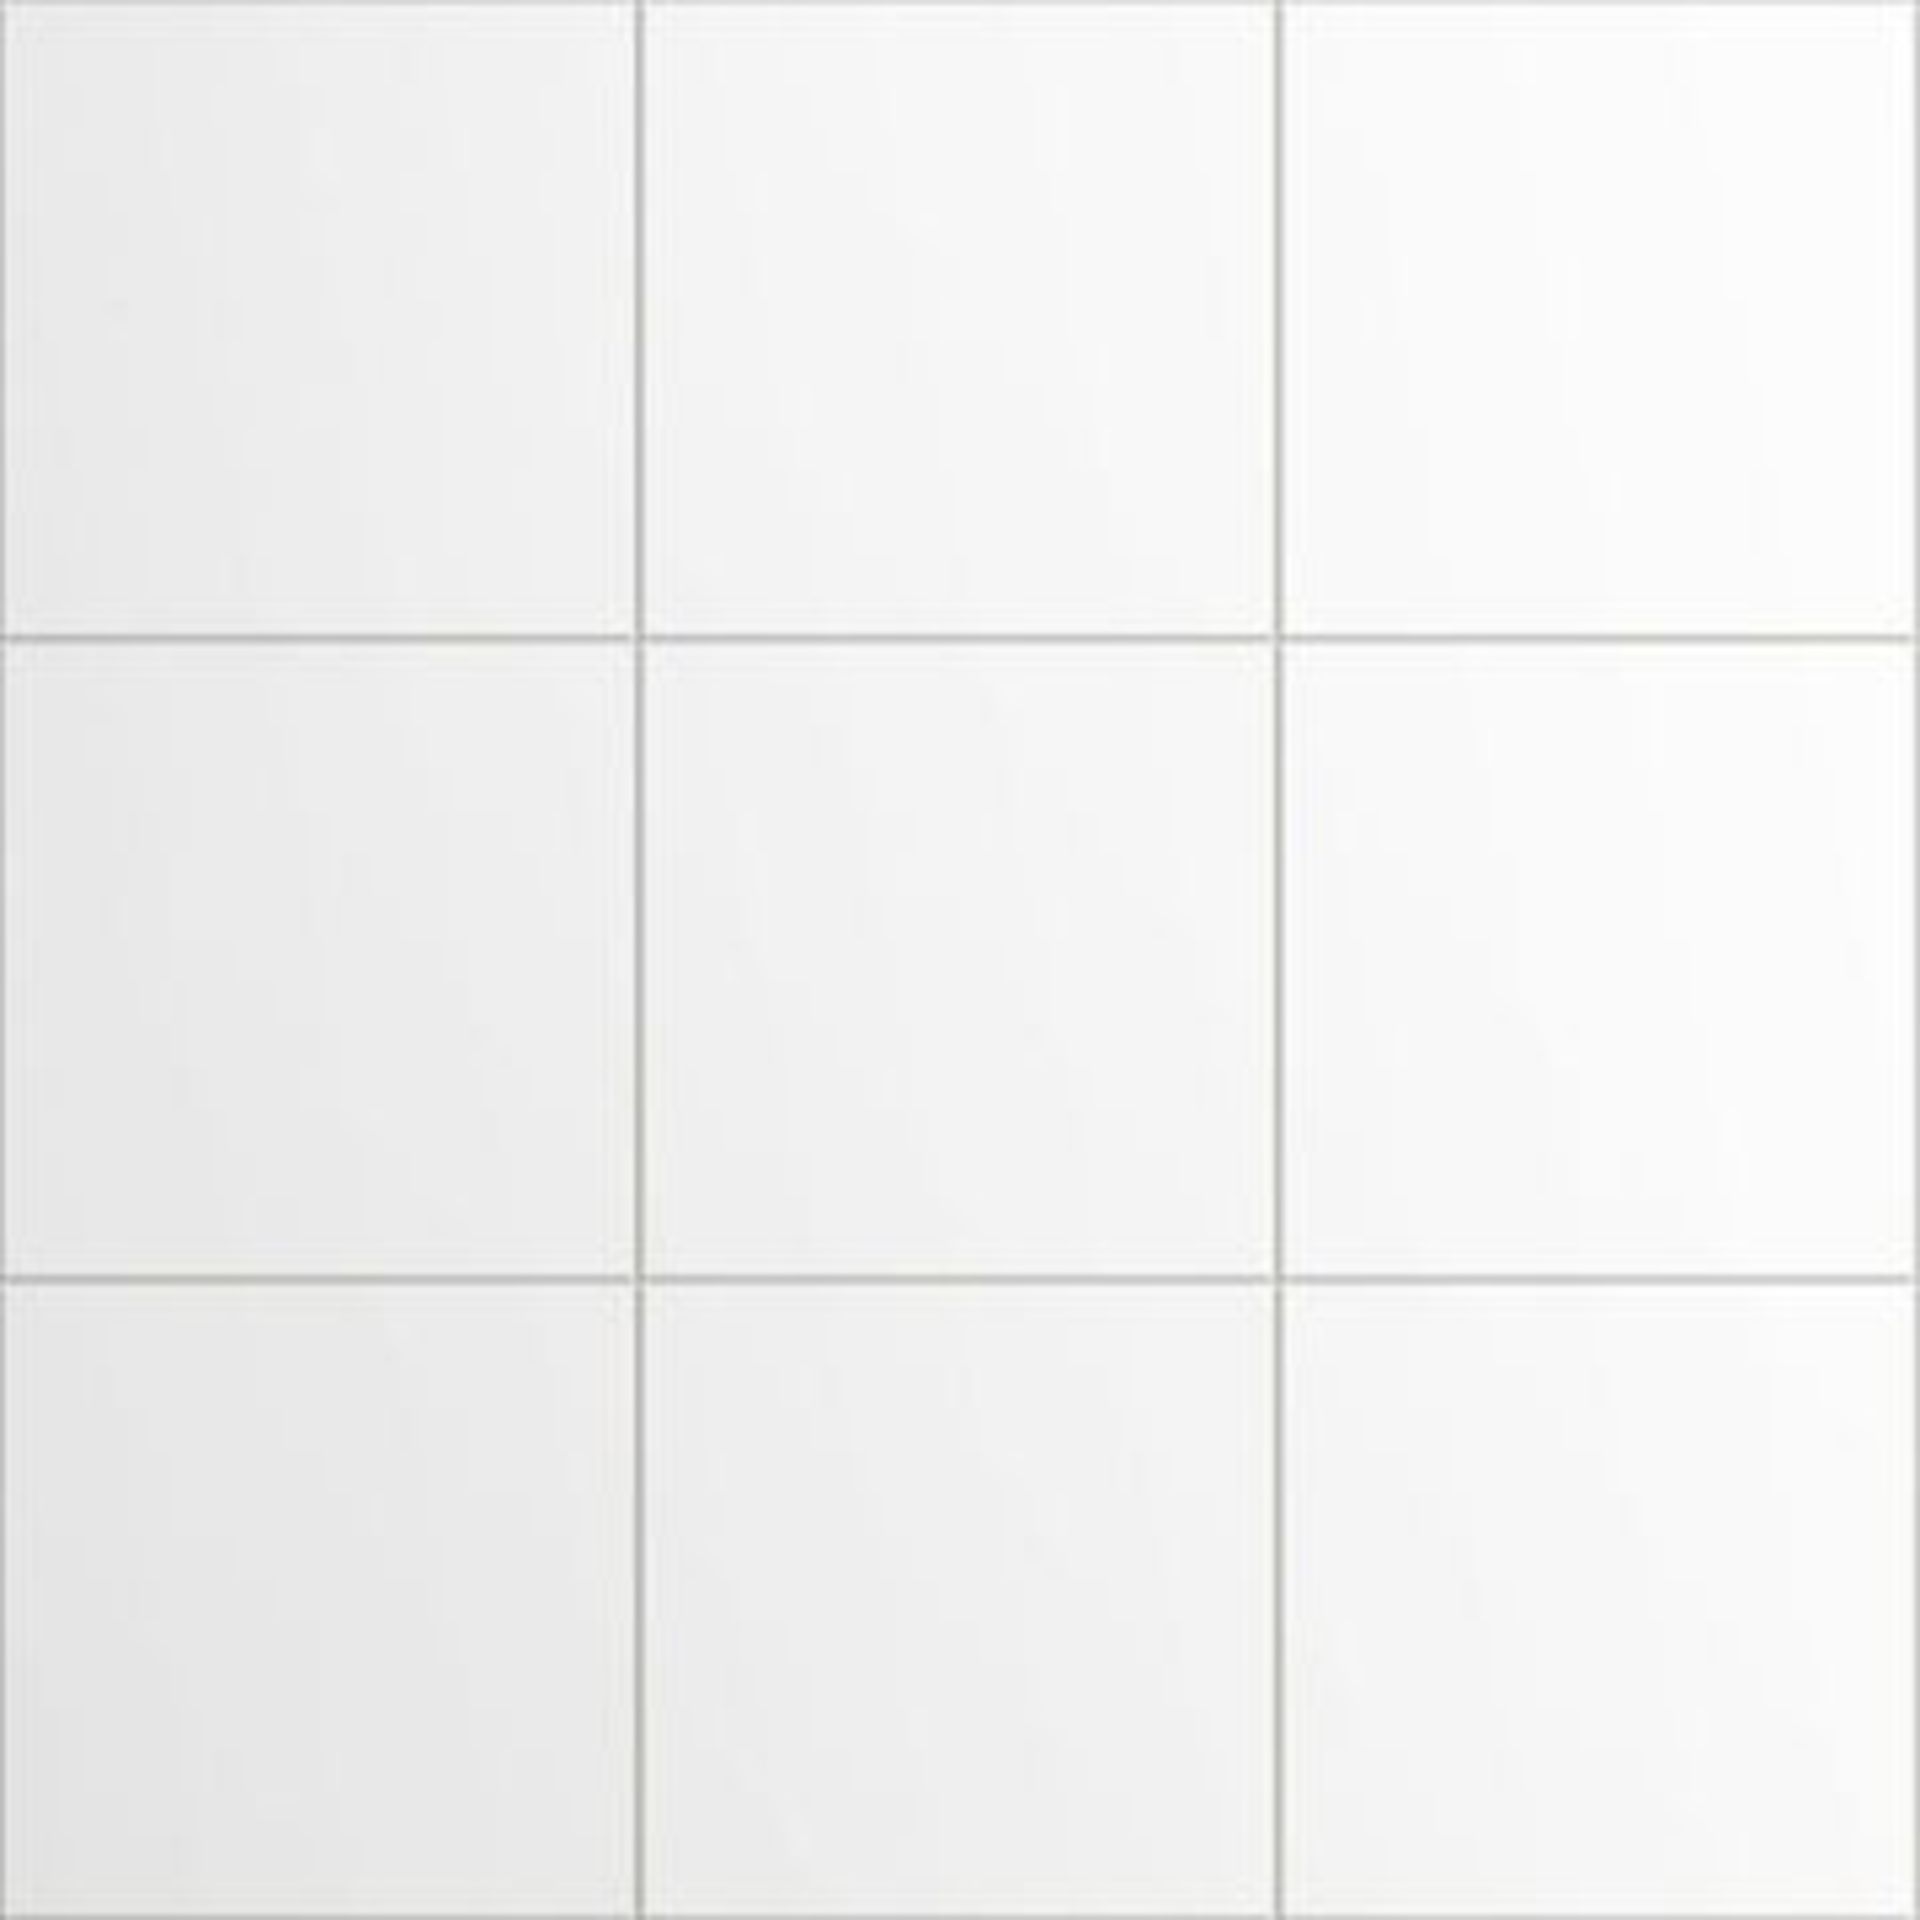 6m2 150x150mm White Square Procelian Wall Tiles. White tiles are an essential product that is ... - Image 2 of 4